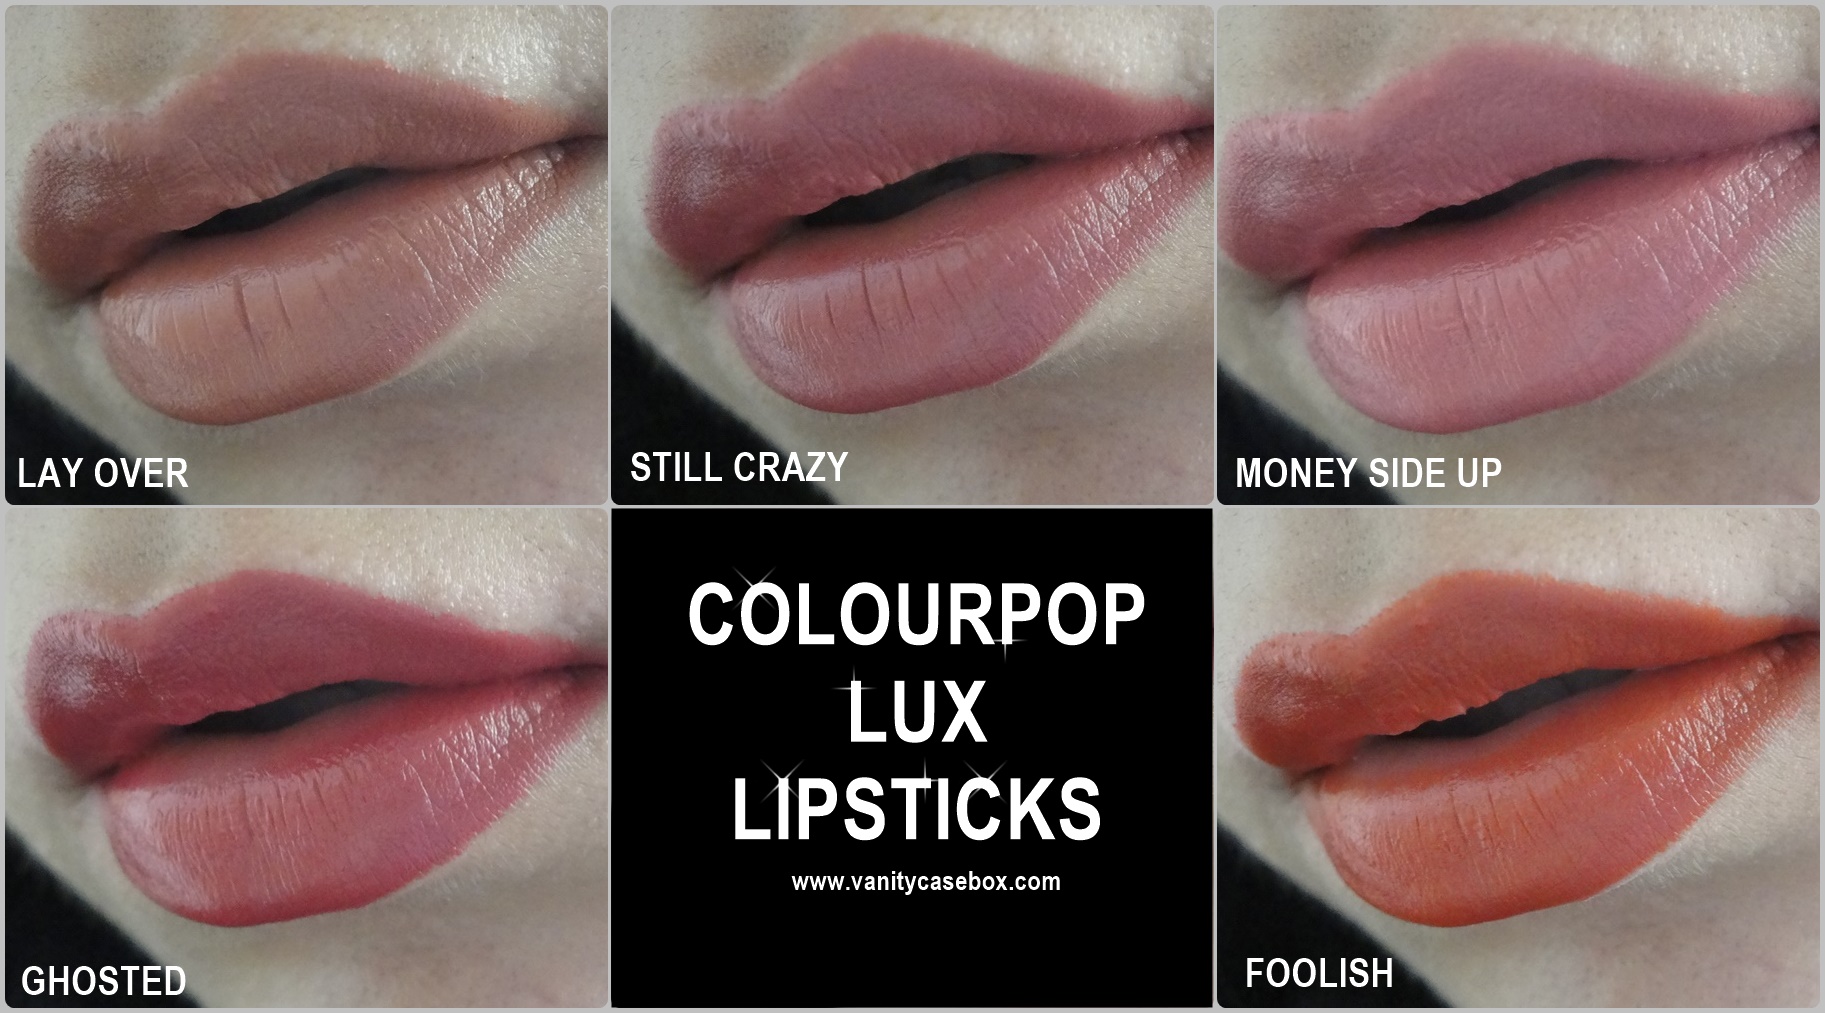 Colourpop lux lipstick swatches on Indian skin tone